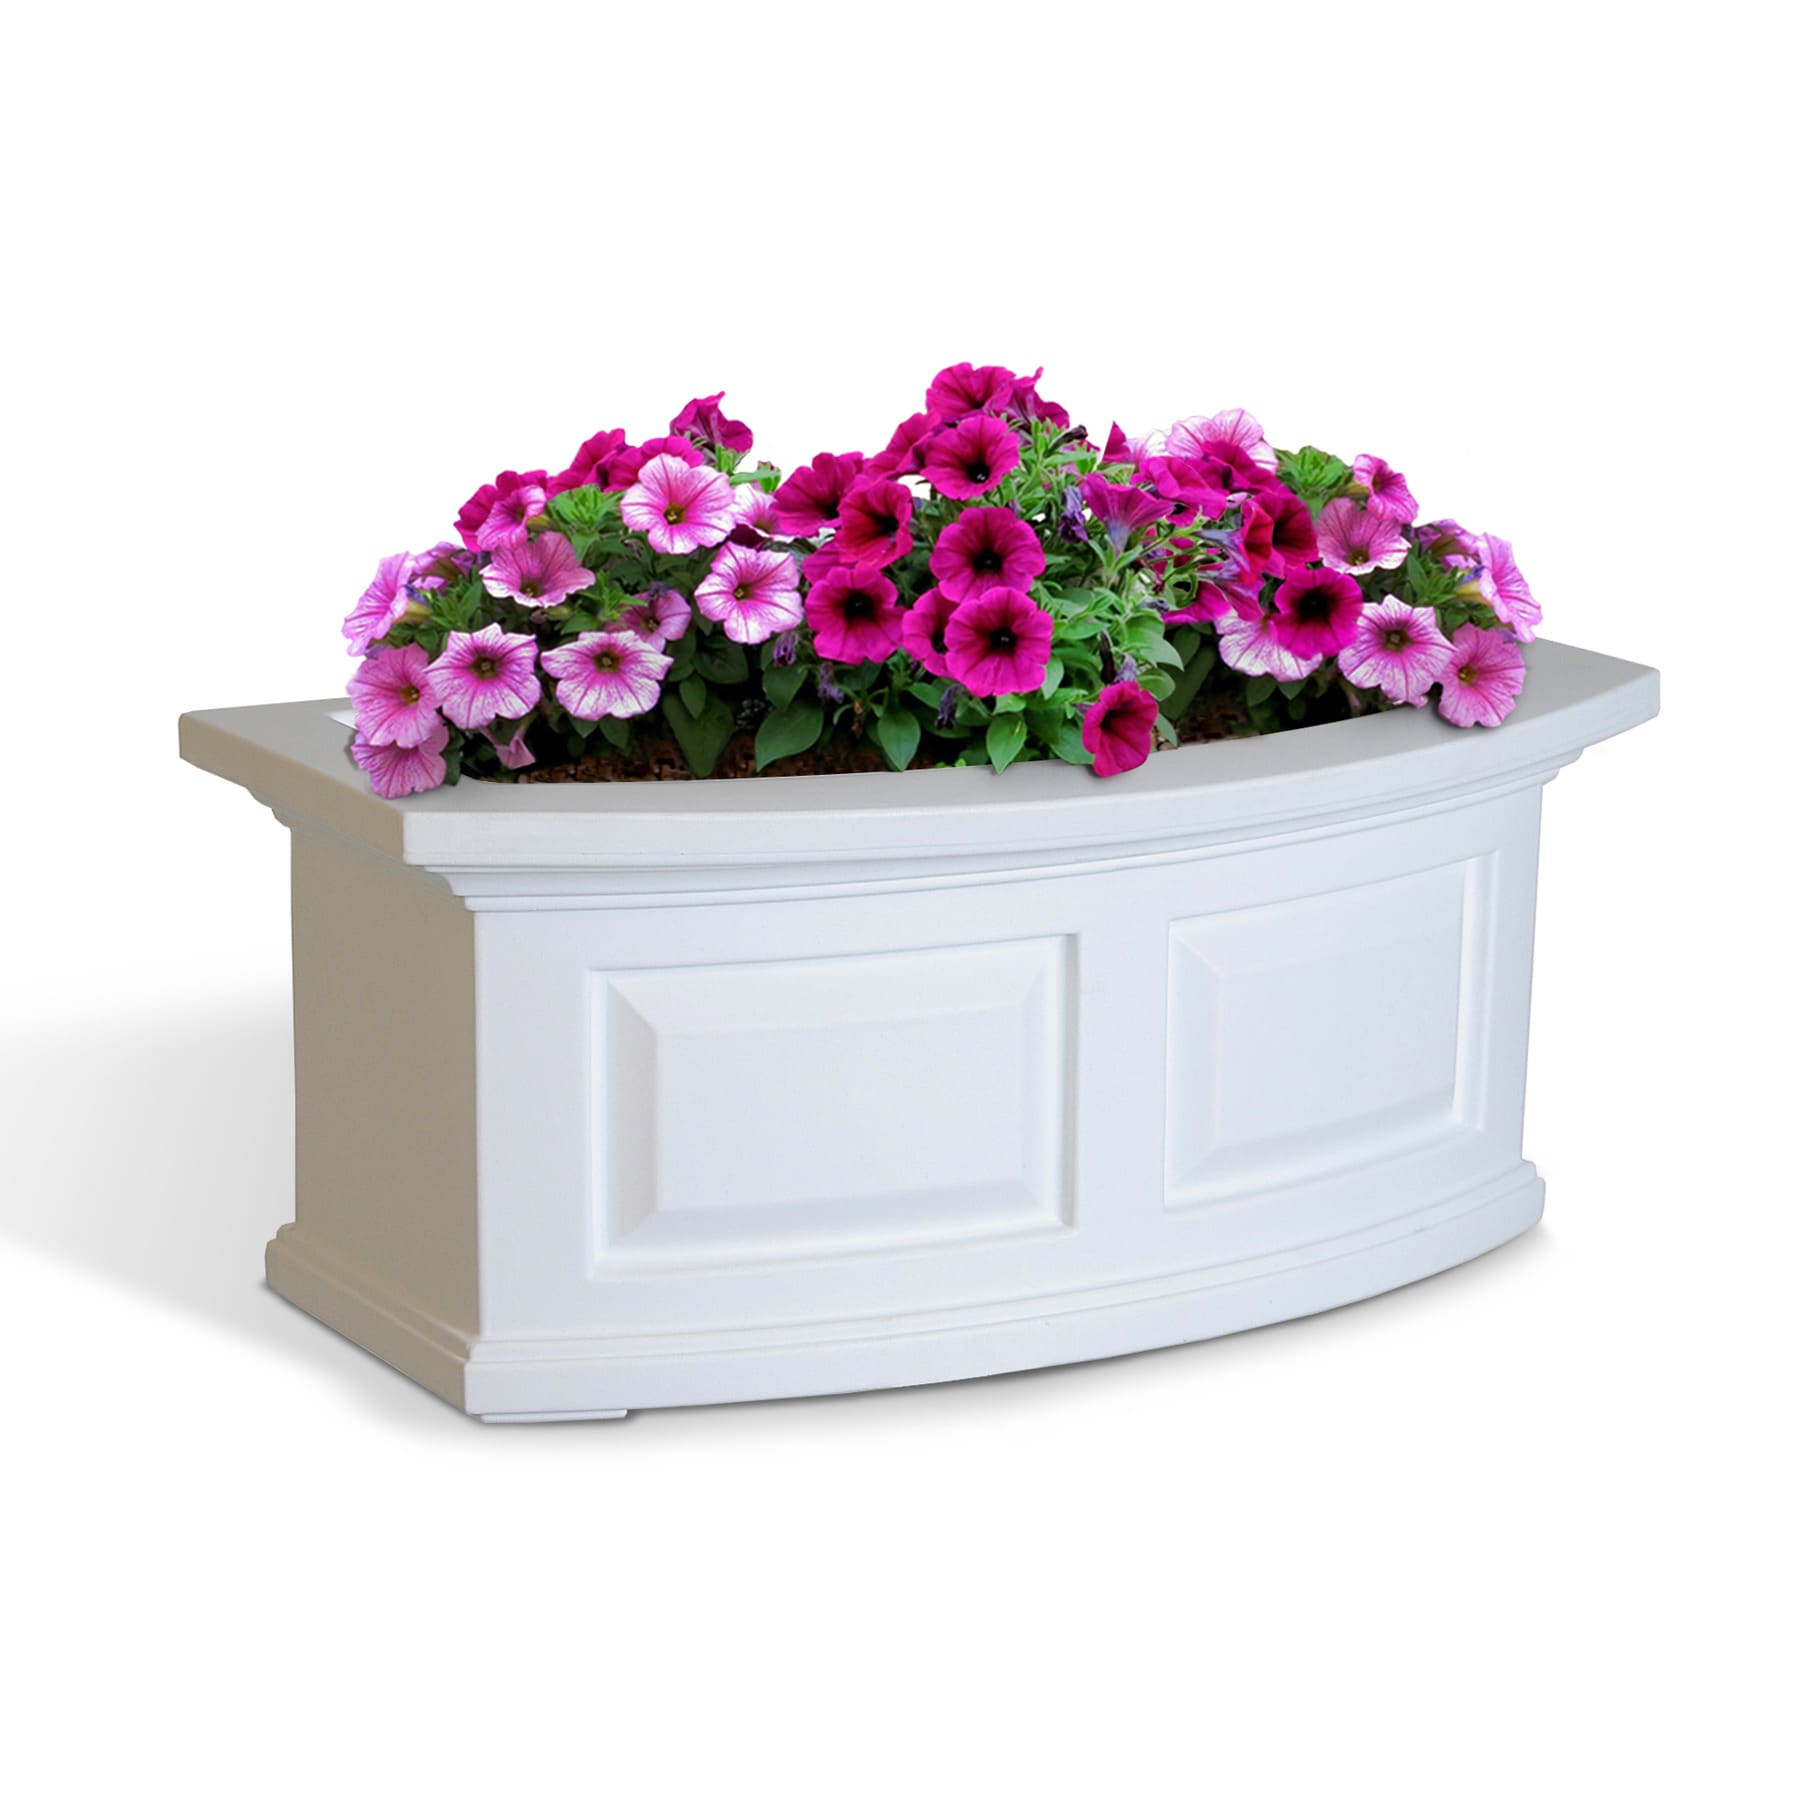 Mayne 24-in W x 10.2-in H White Resin Traditional Outdoor Window Box in ...